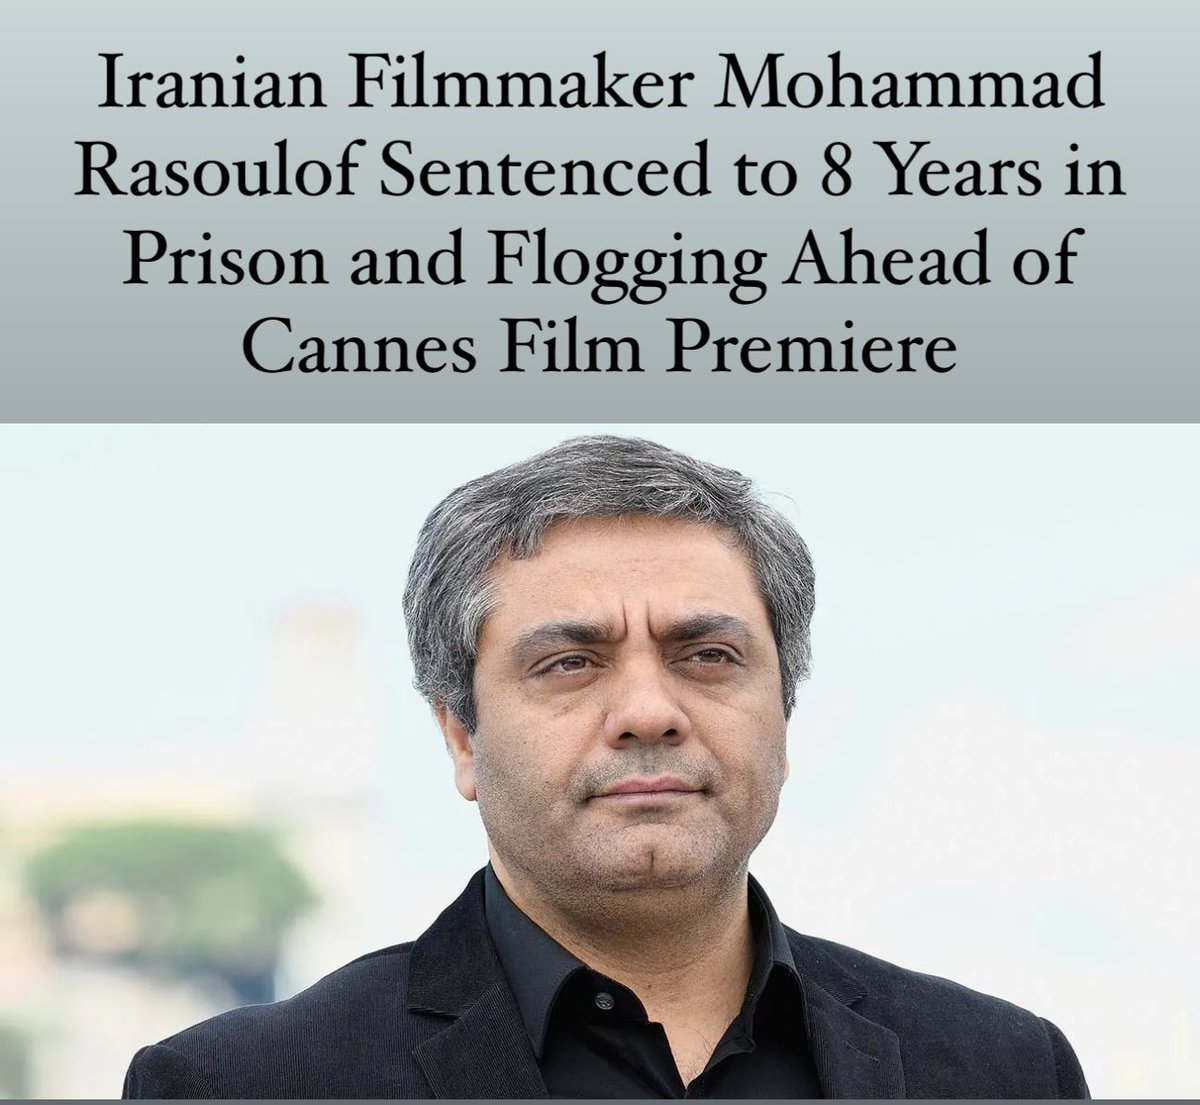 May 8 - Iranian filmmaker Mohammad Rasoulof has been sentenced to eight years in prison by Iran’s Islamic Revolution Court. 
In addition to the prison term, he will also face flogging, a fine, and confiscation of property. 
This verdict comes just days before the premiere of his…